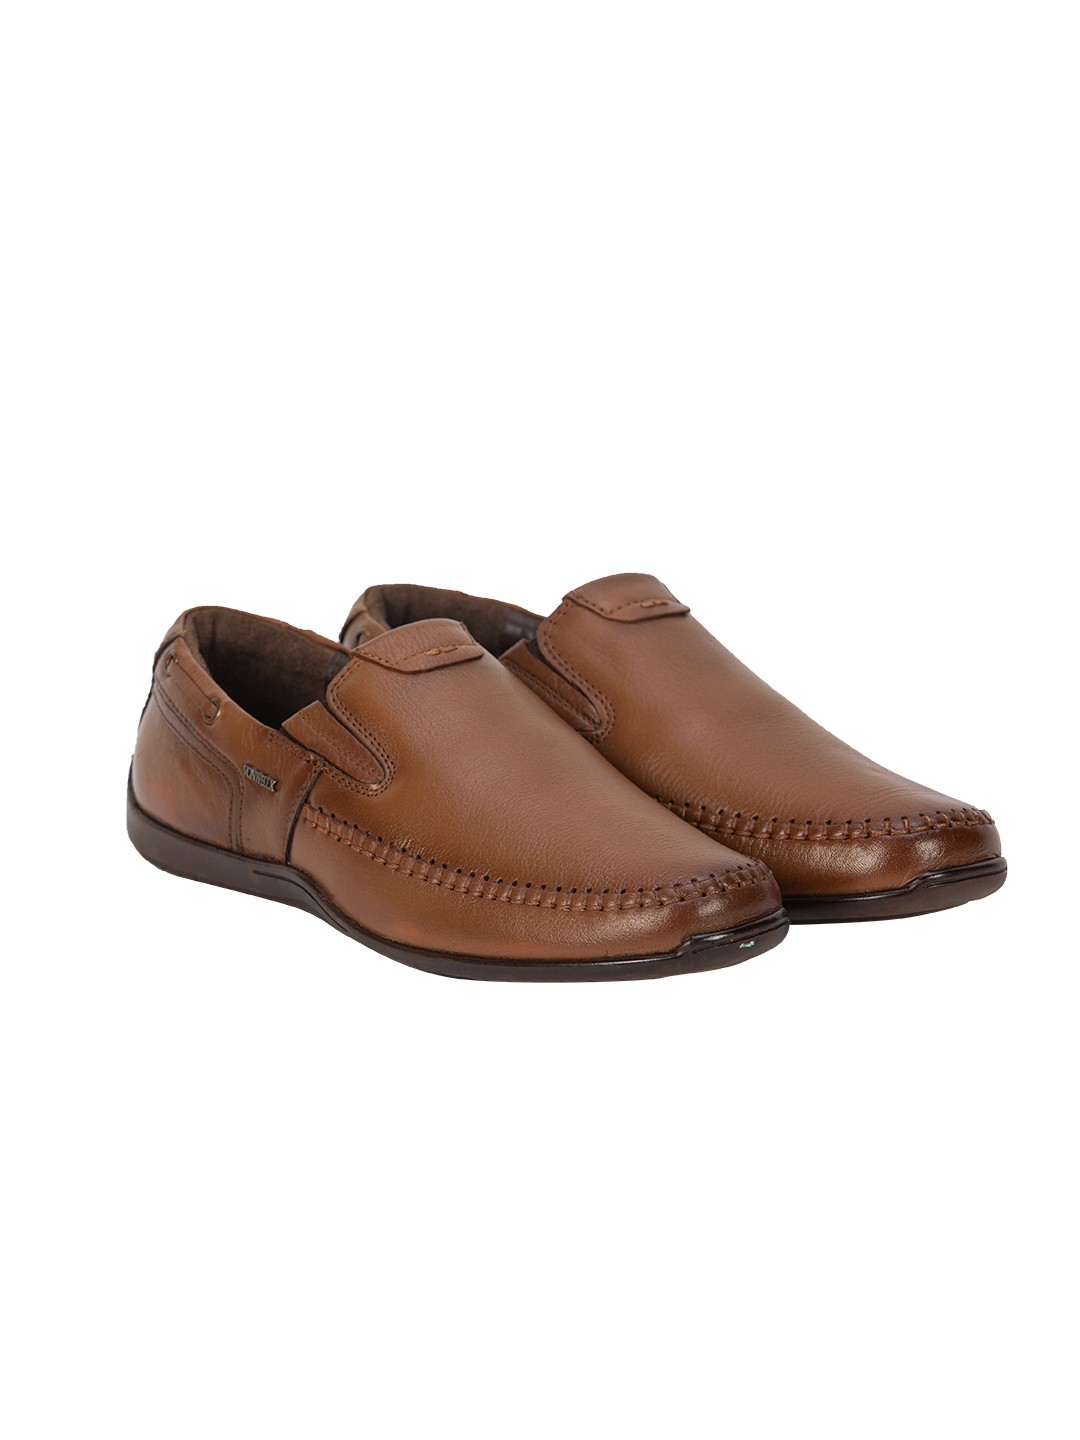 Buy Von Wellx Axel Casual Tan Shoes Online in Coimbatore